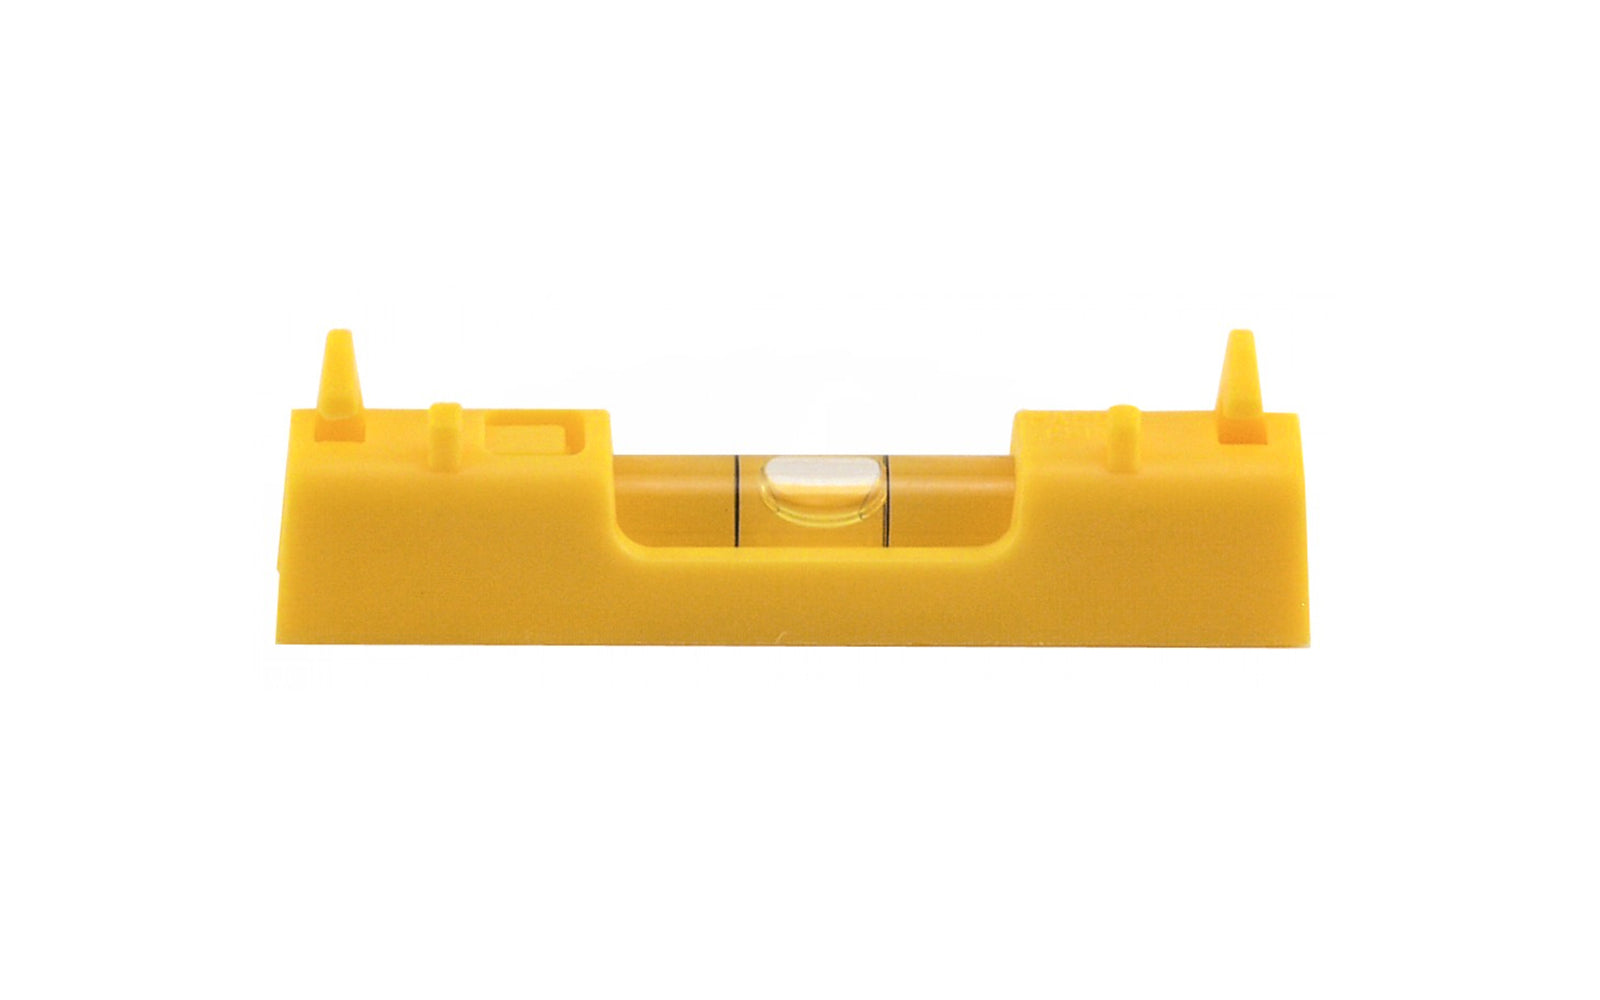 Mayes Poly Line Level ~ 2 Pack - Model No. 10199 ~ 2 levels in pack ~ 3" overall length ~ Flat surface ideal for surface leveling ~ Easily readable from all sides ~ High impact vials - Accurate to within .001